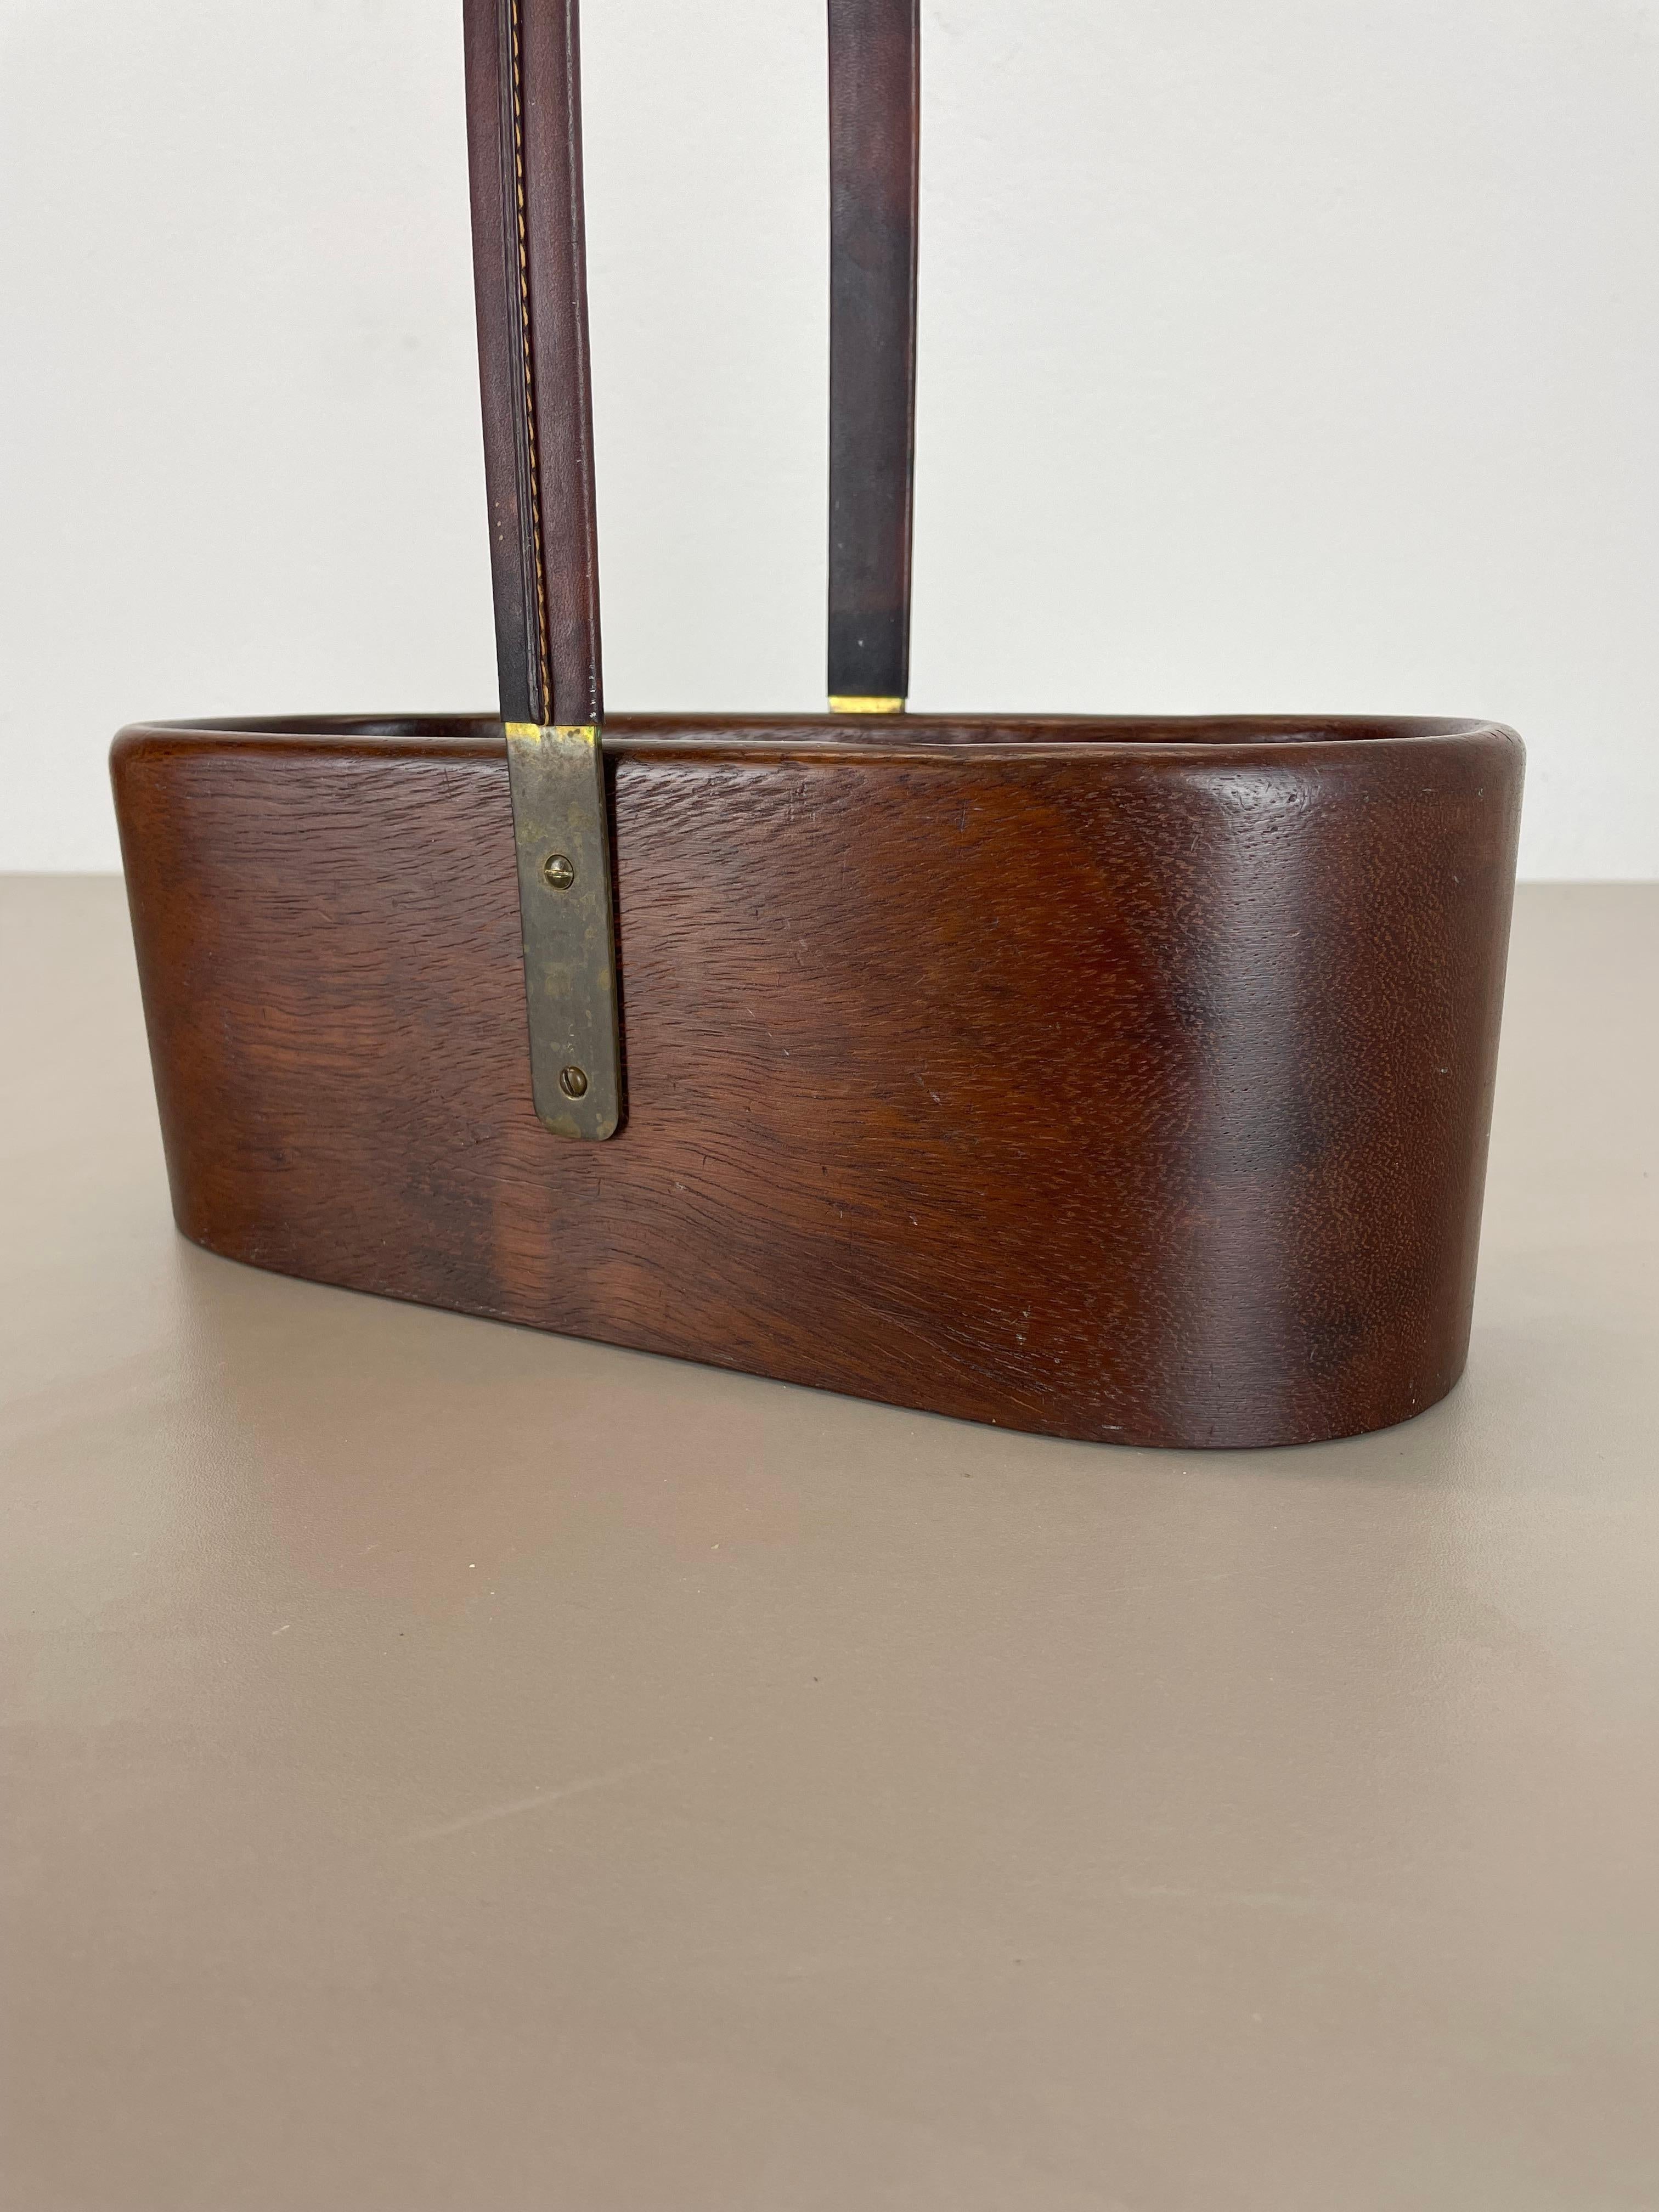 Teak Bottle Holder with Brass and Leather Handle by Carl Auböck, Austria, 1950s For Sale 5